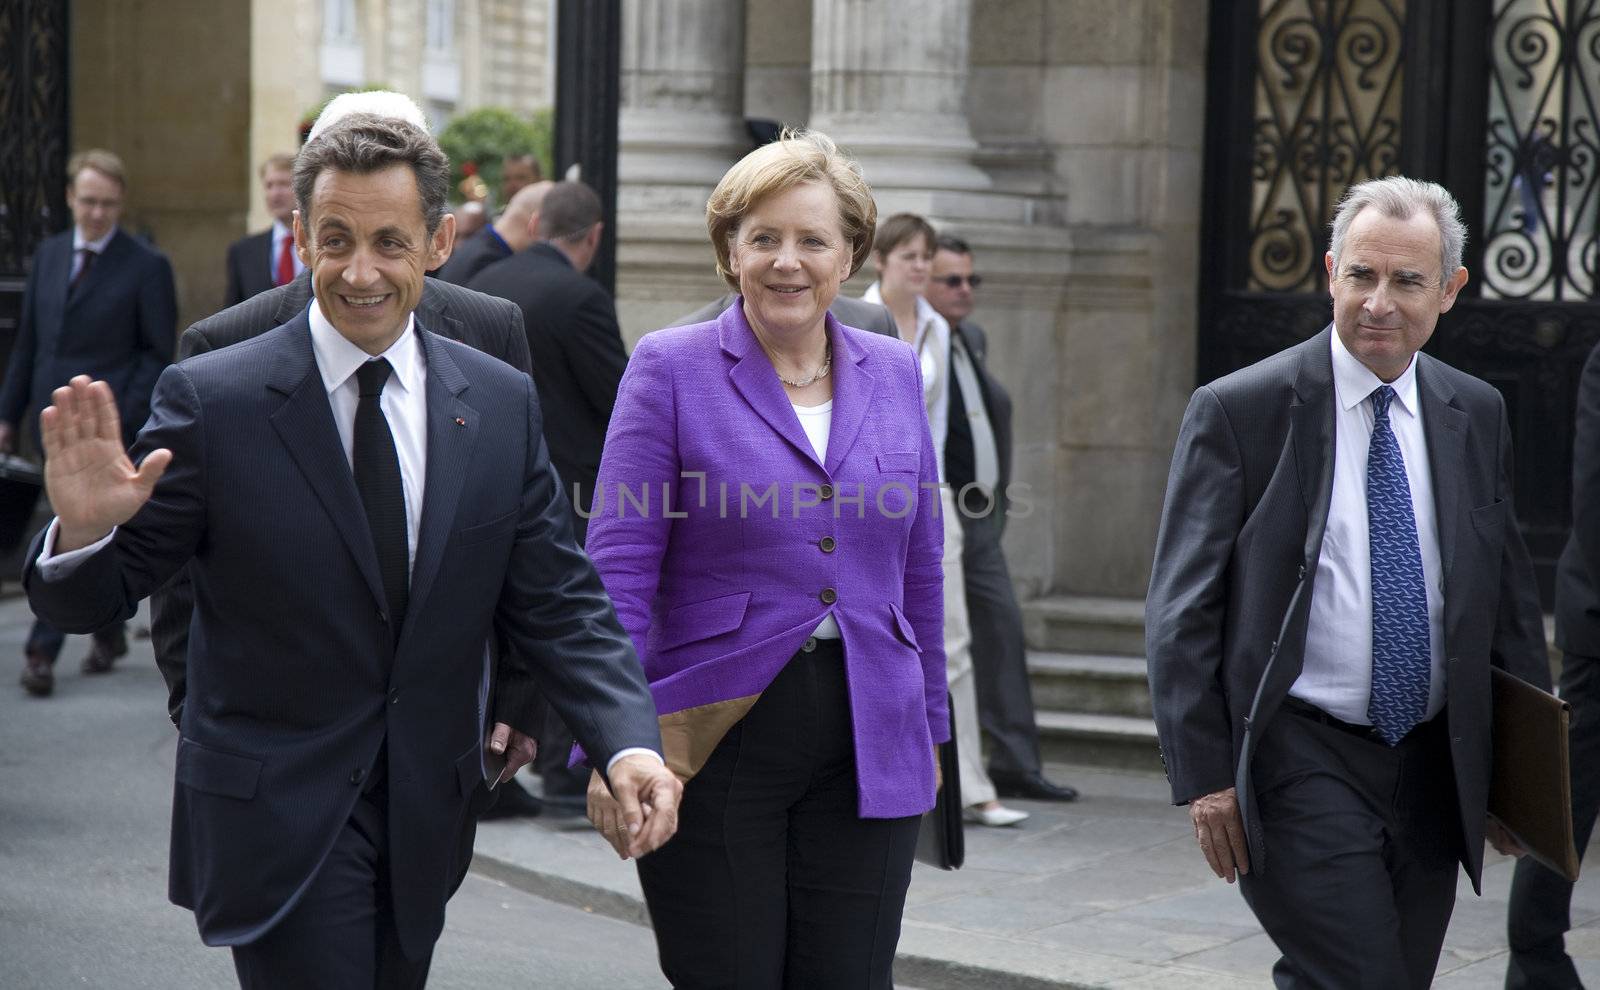 PARIS, FRANCE - JUNE 11 - 2009: French president Nicolas Sarkozy (waving) and German chancellor Angela Merkel (C) outside the Elysee Palace on their way to lunch.